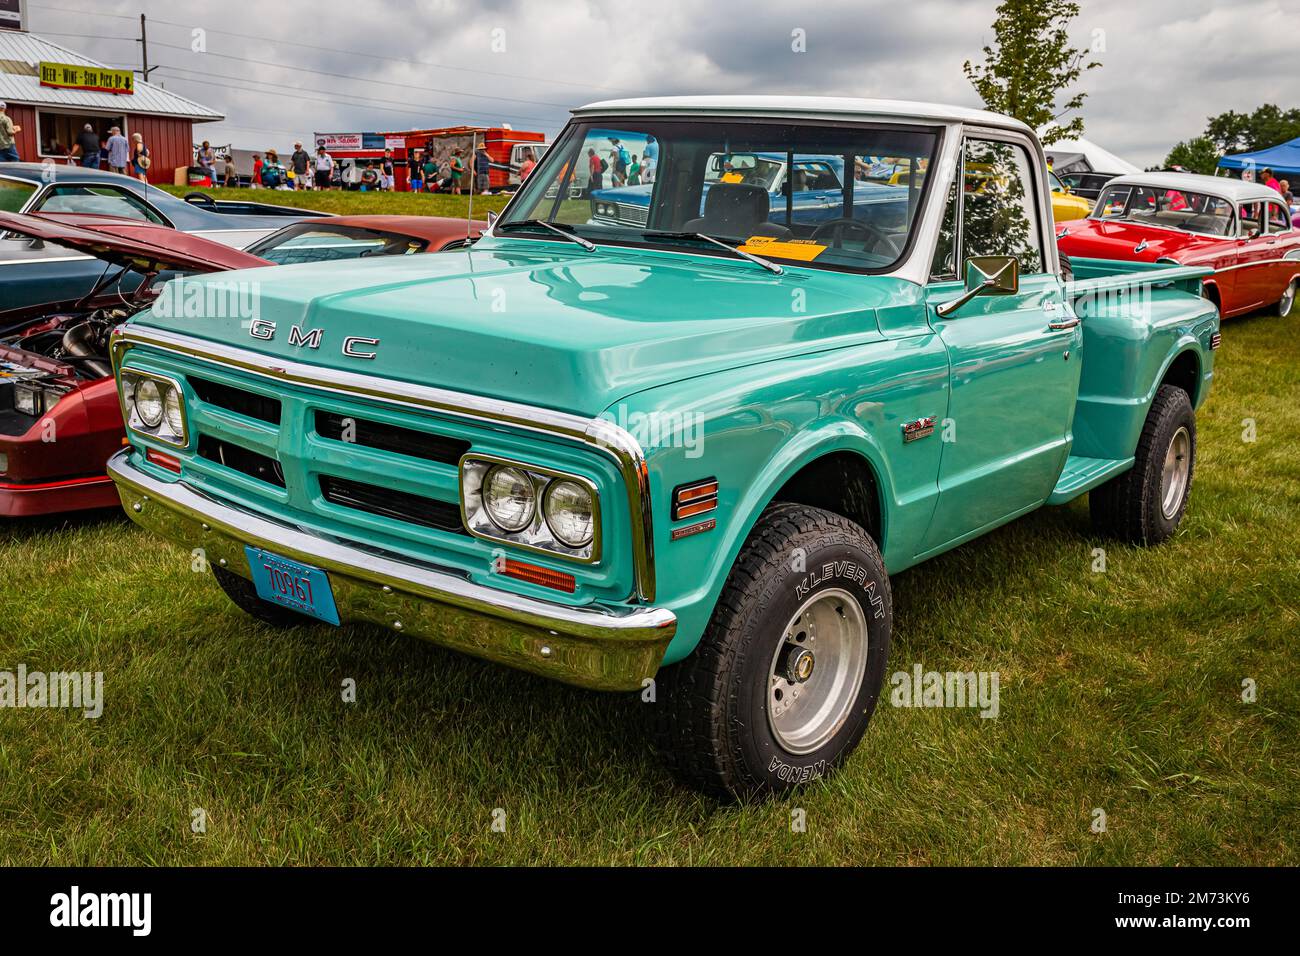 Iola, WI - July 07, 2022: High perspective front corner view of a 1968 GMC 1500 Stepside Pickup Truck at a local car show. Stock Photo